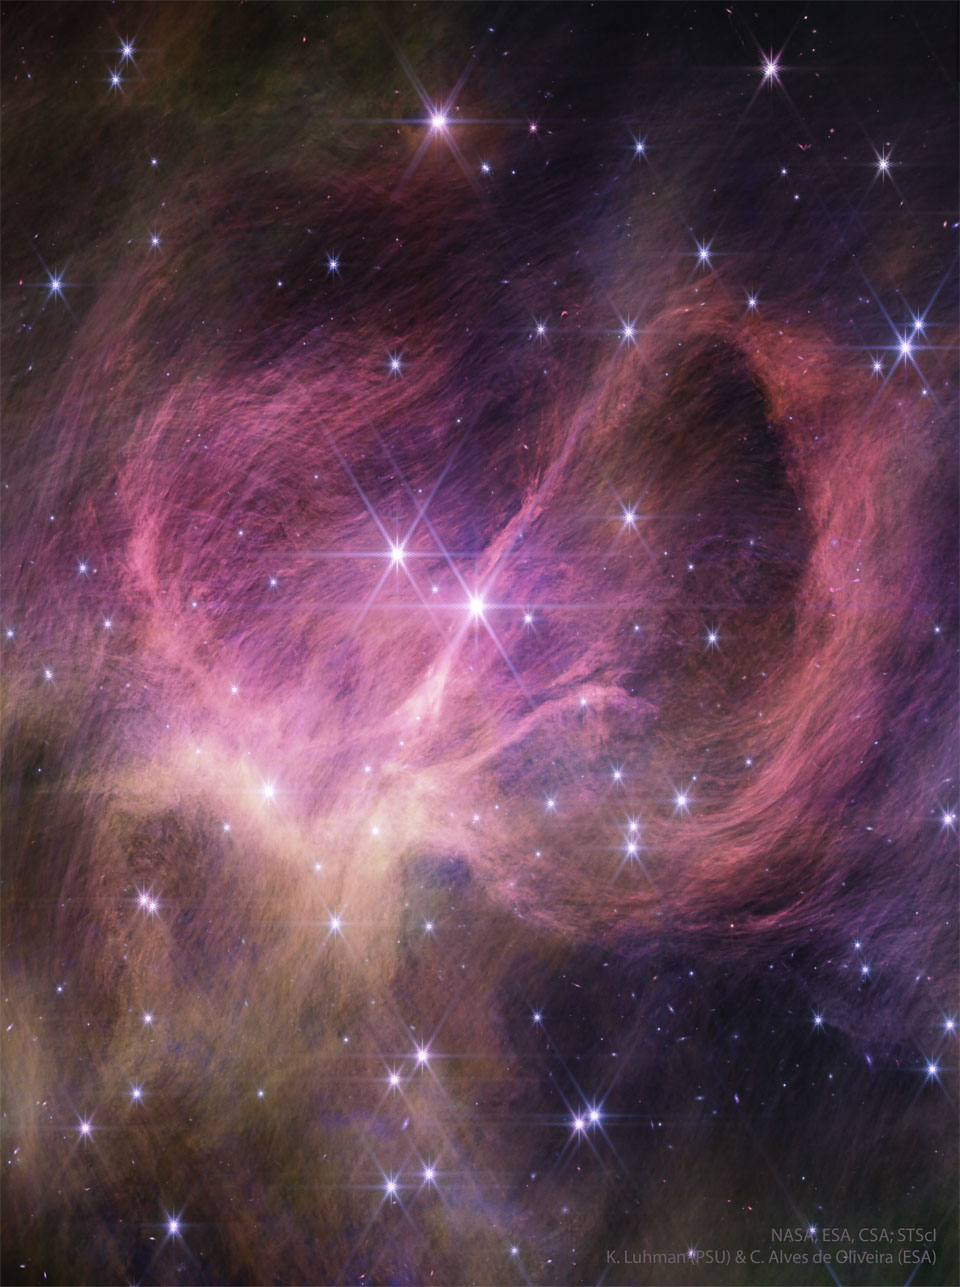 A cluster of stars is shown along with surrounding nebular gas a
and dust. Shown in infrared light in pink, the dust winds around the 
nebula center and itself appears composed of many finer filaments.
Więcej szczegółowych informacji w opisie poniżej.